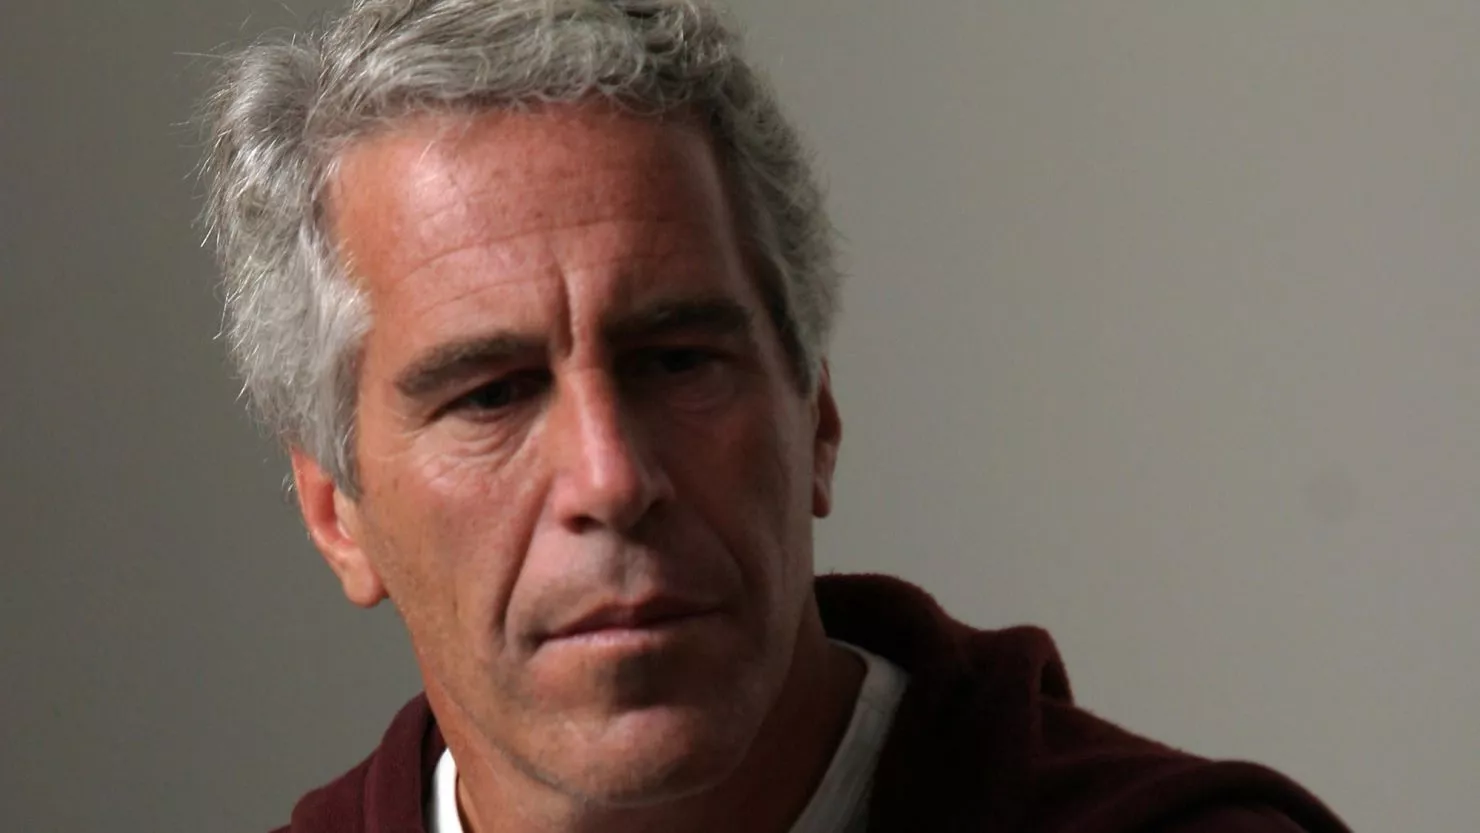 who-is-jeffrey-epstein-and-what-released-court-documents-are-about